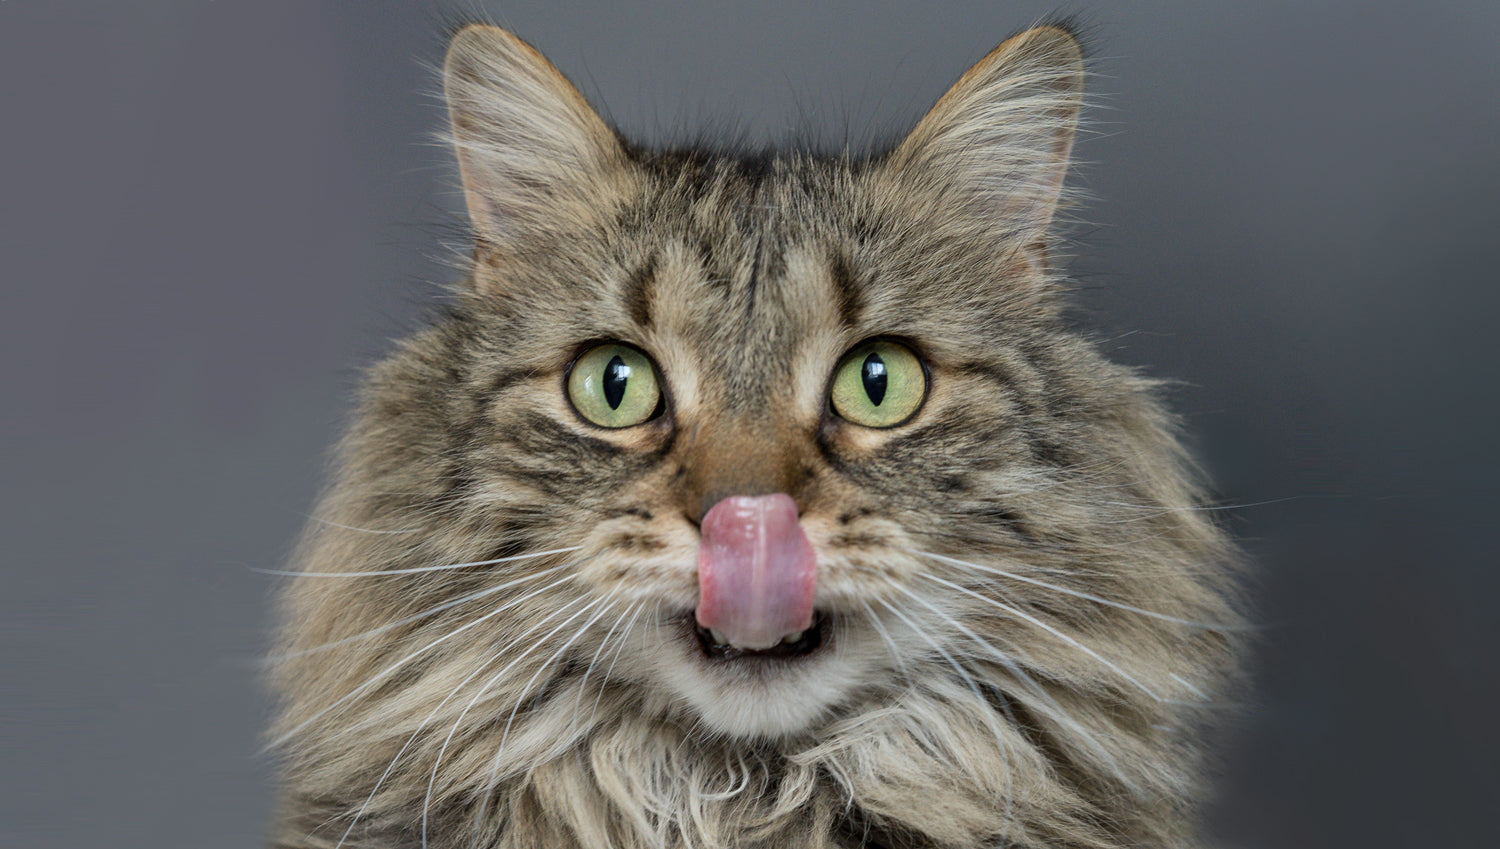 long haired cat with green eyes licking lips photographed on grey background